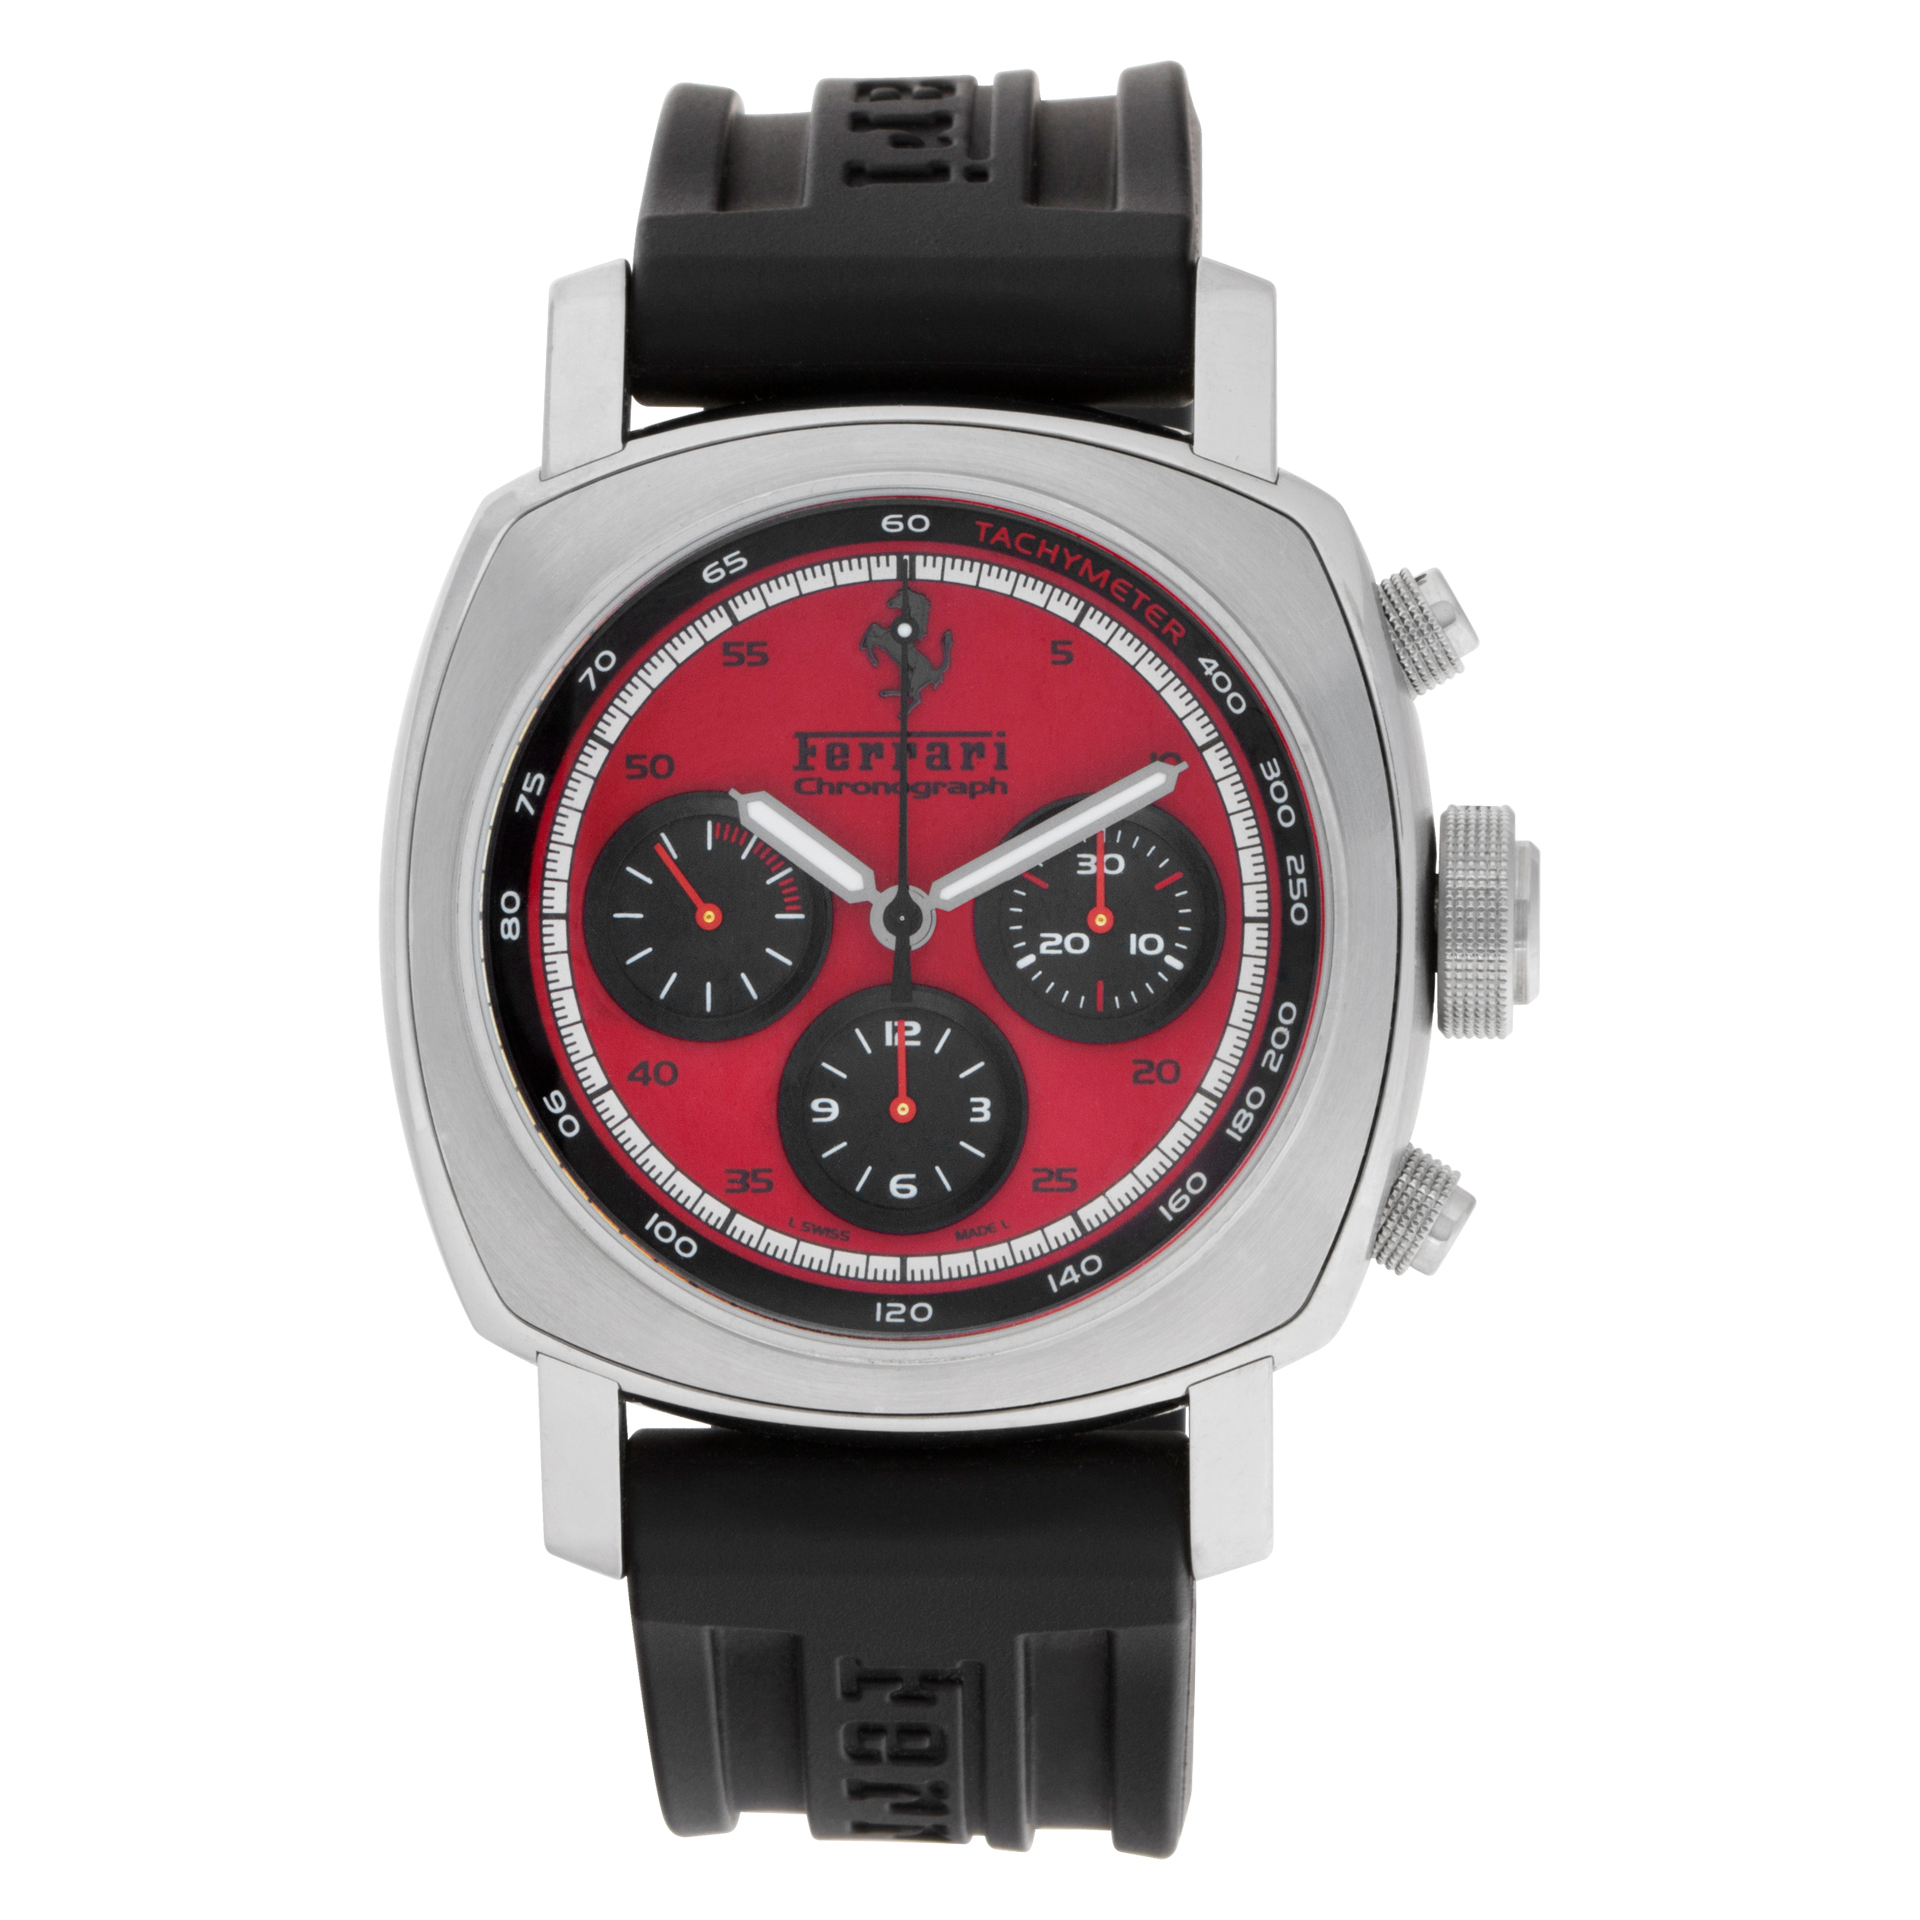 Panerai Ferrari FER00013 Stainless Steel Red dial 44mm Automatic watch